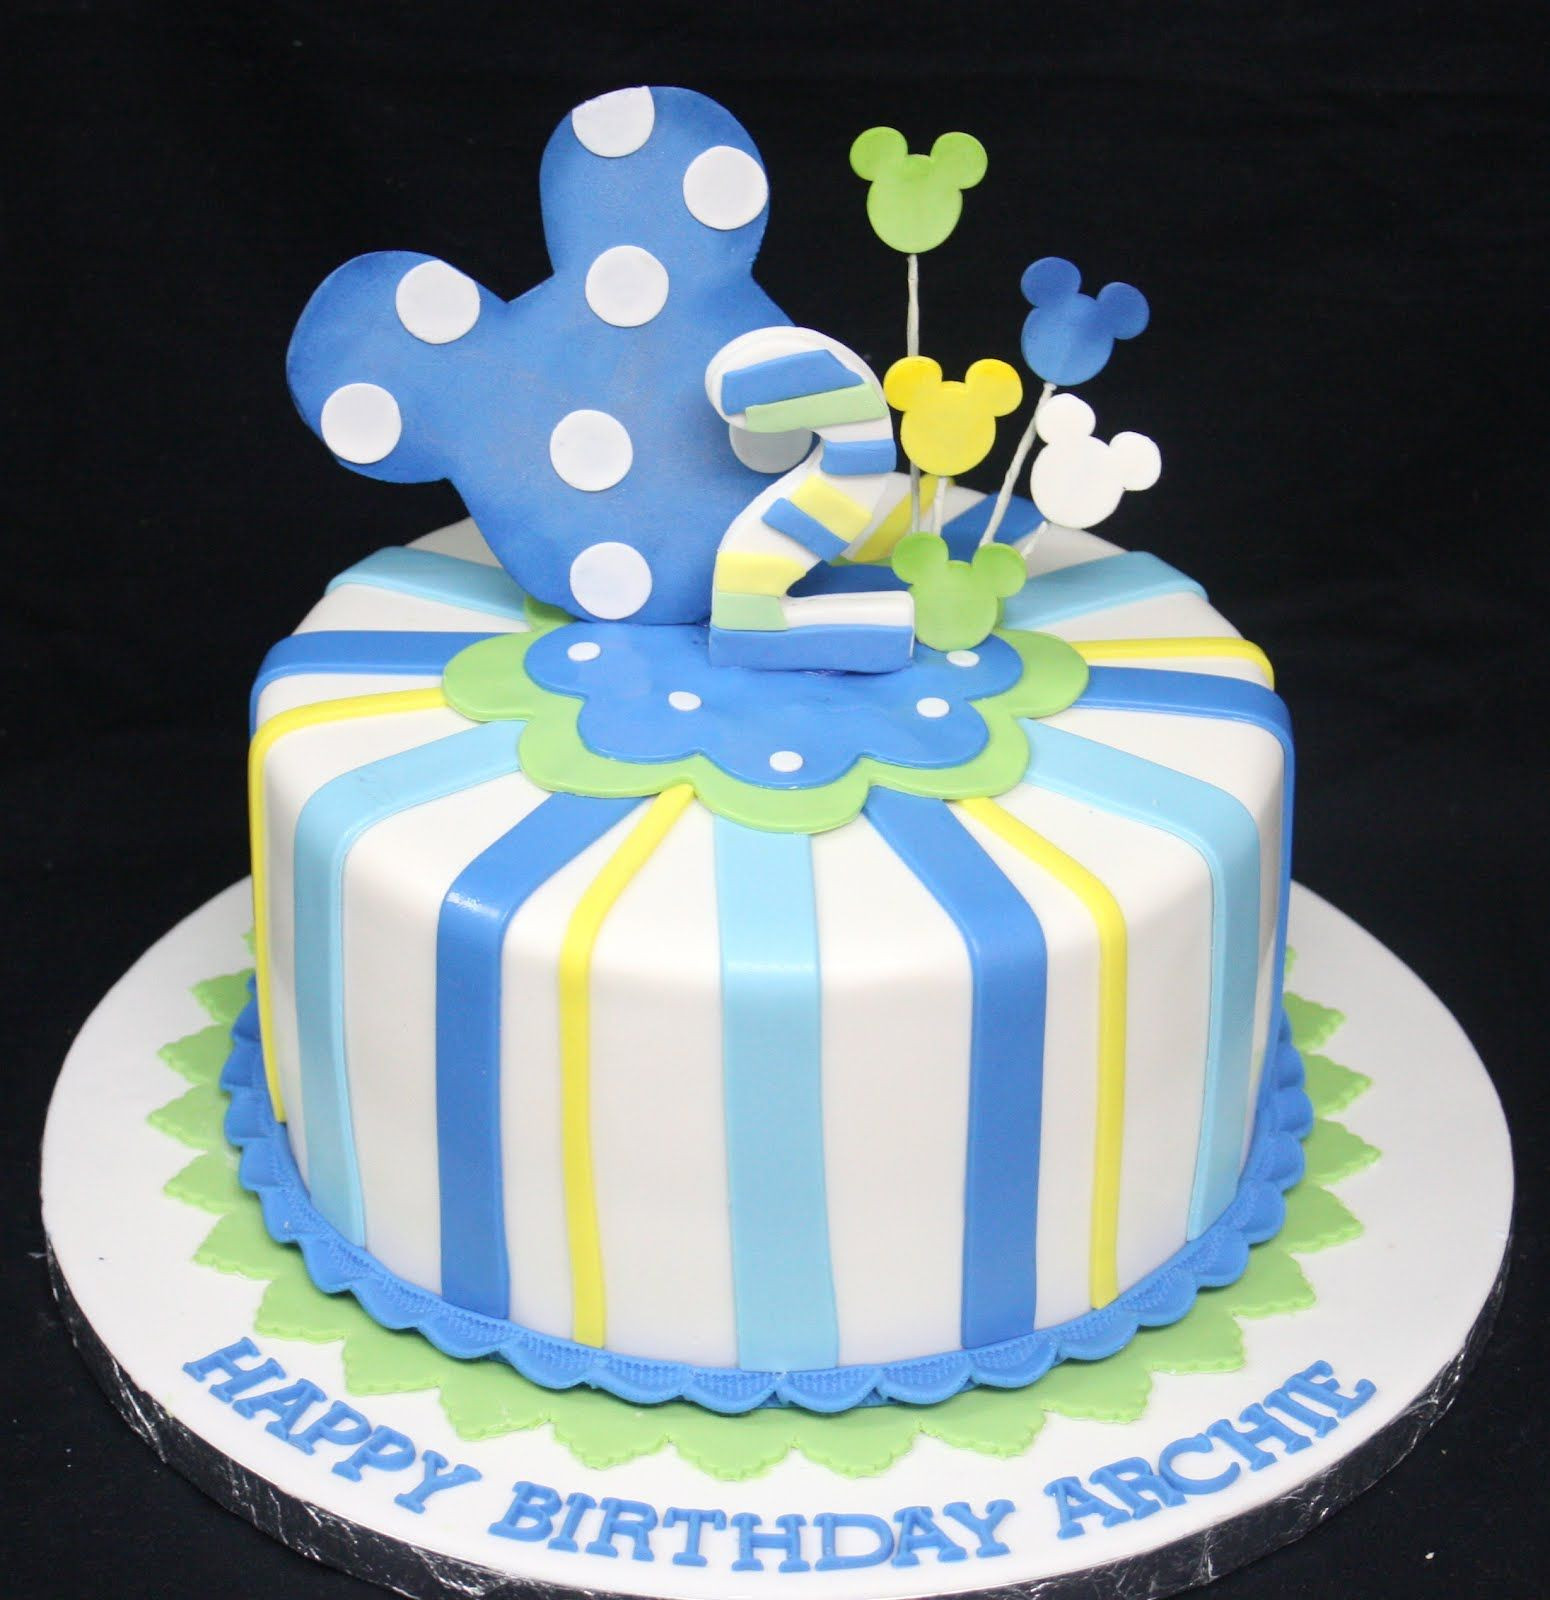 Mickey Mouse Birthday Cake Decorations
 baby mickey mouse 1st birthday cake decoration